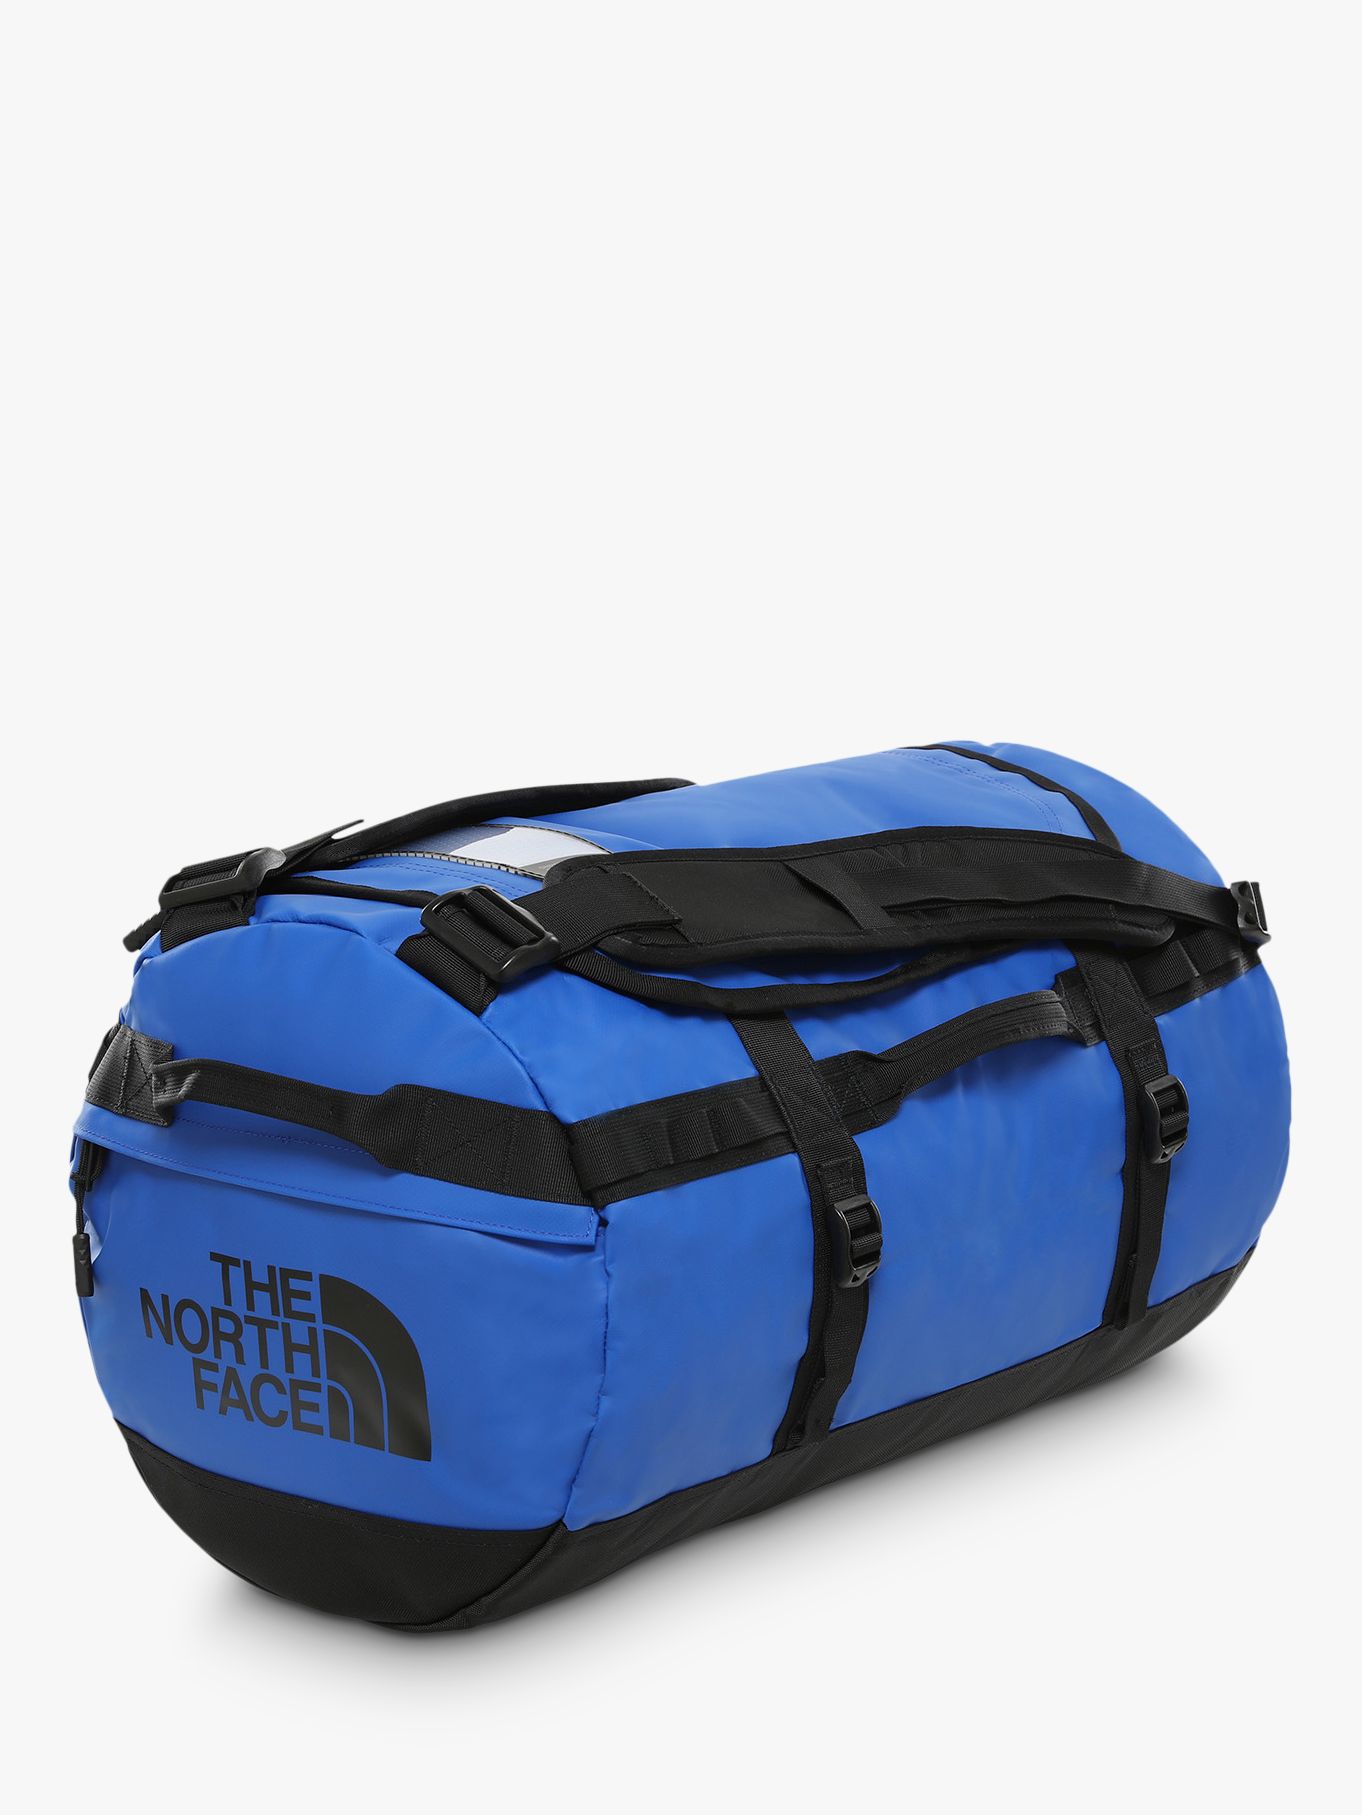 The North Face Base Camp Duffel Bag Small Tnf Blue Tnf Black At John Lewis Partners